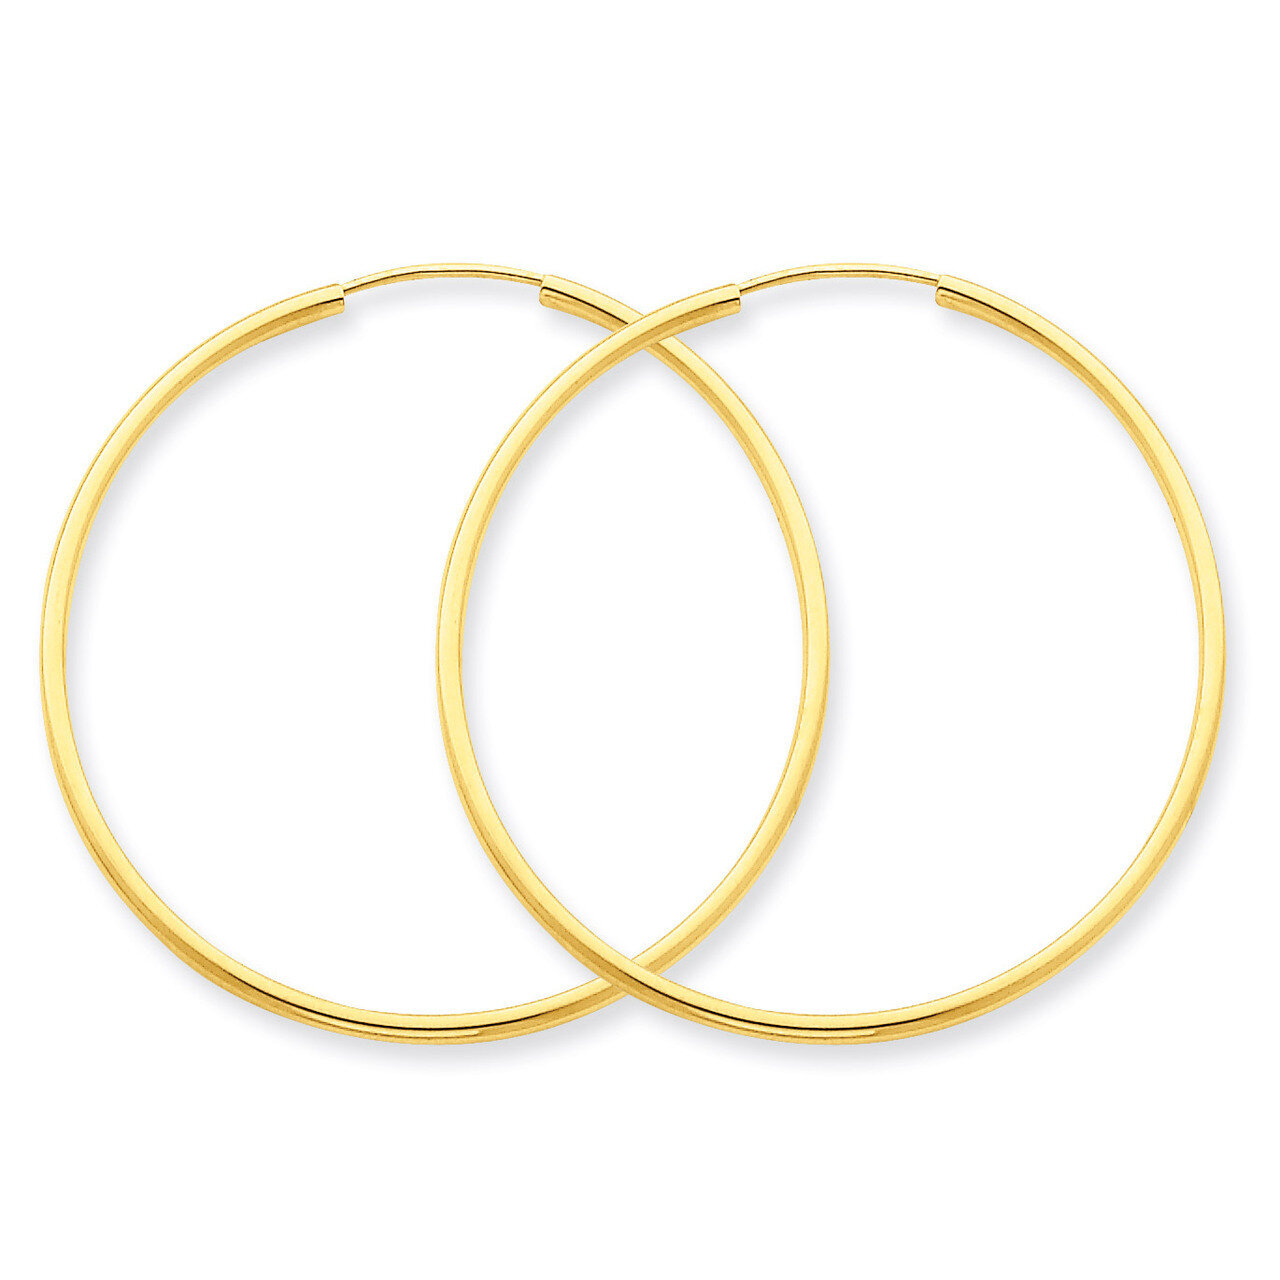 1.5mm Polished Round Endless Hoop Earrings 14k Gold XY1163